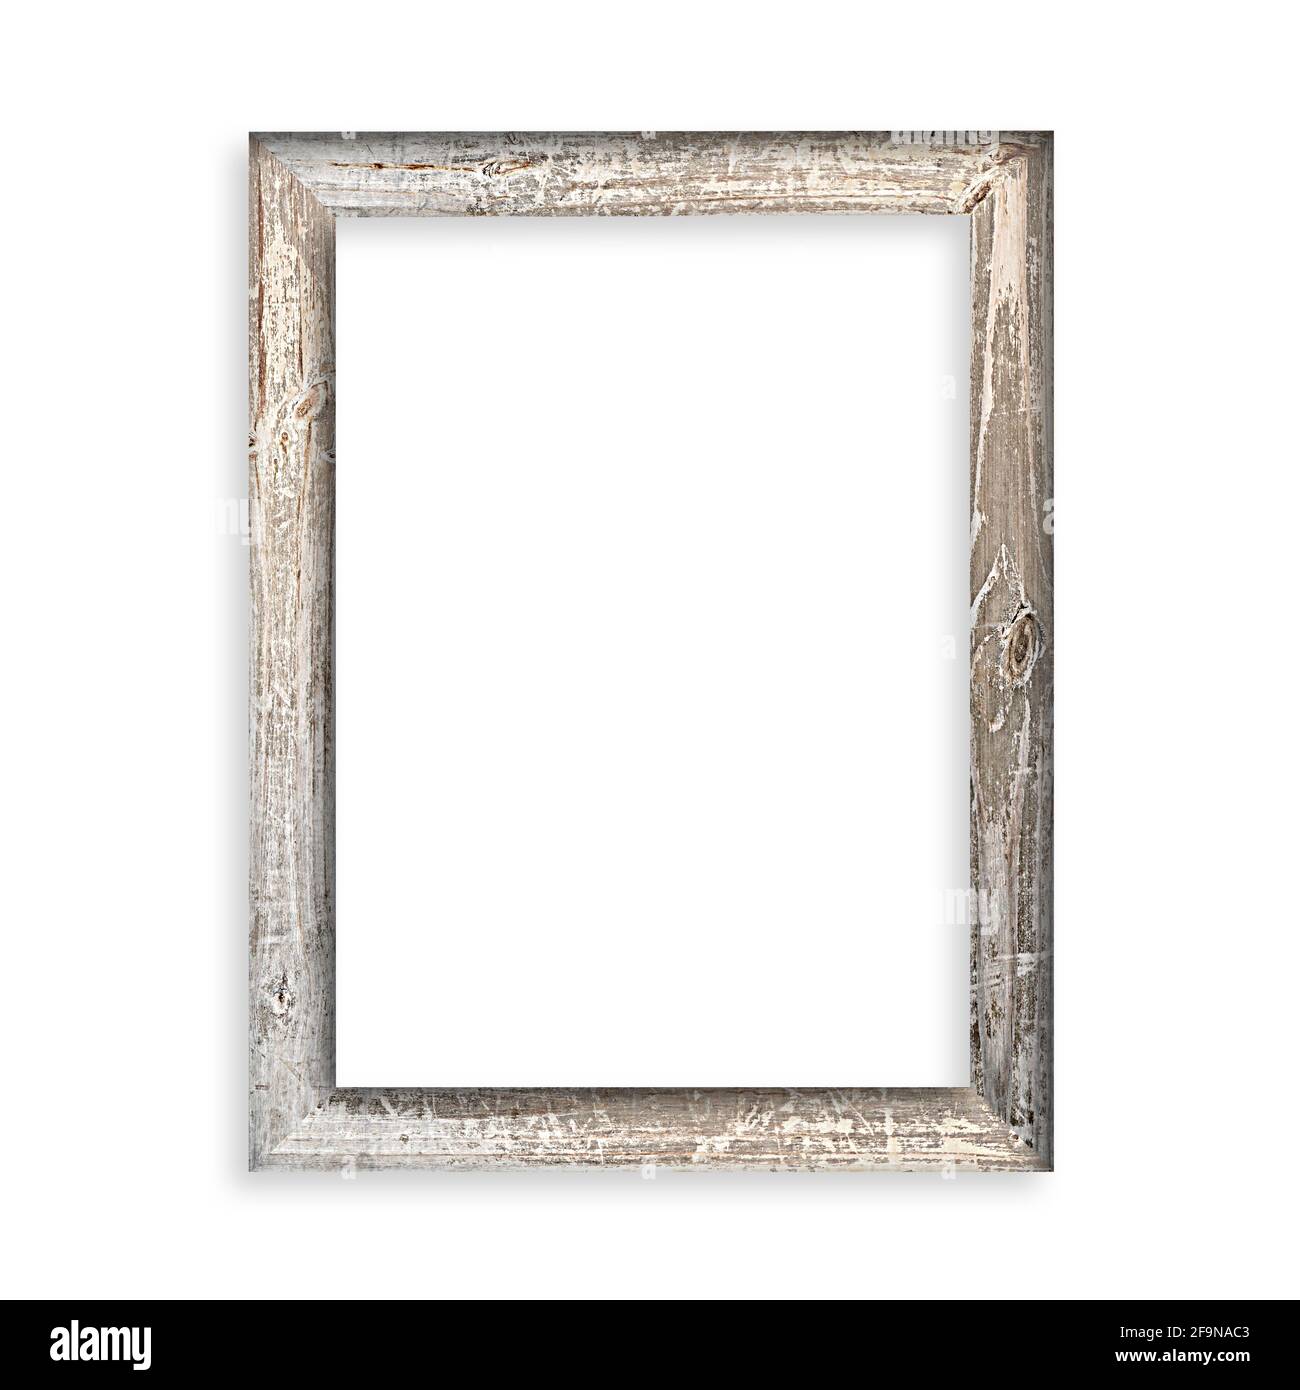 Old wooden picture frame isolated on white background Stock Photo